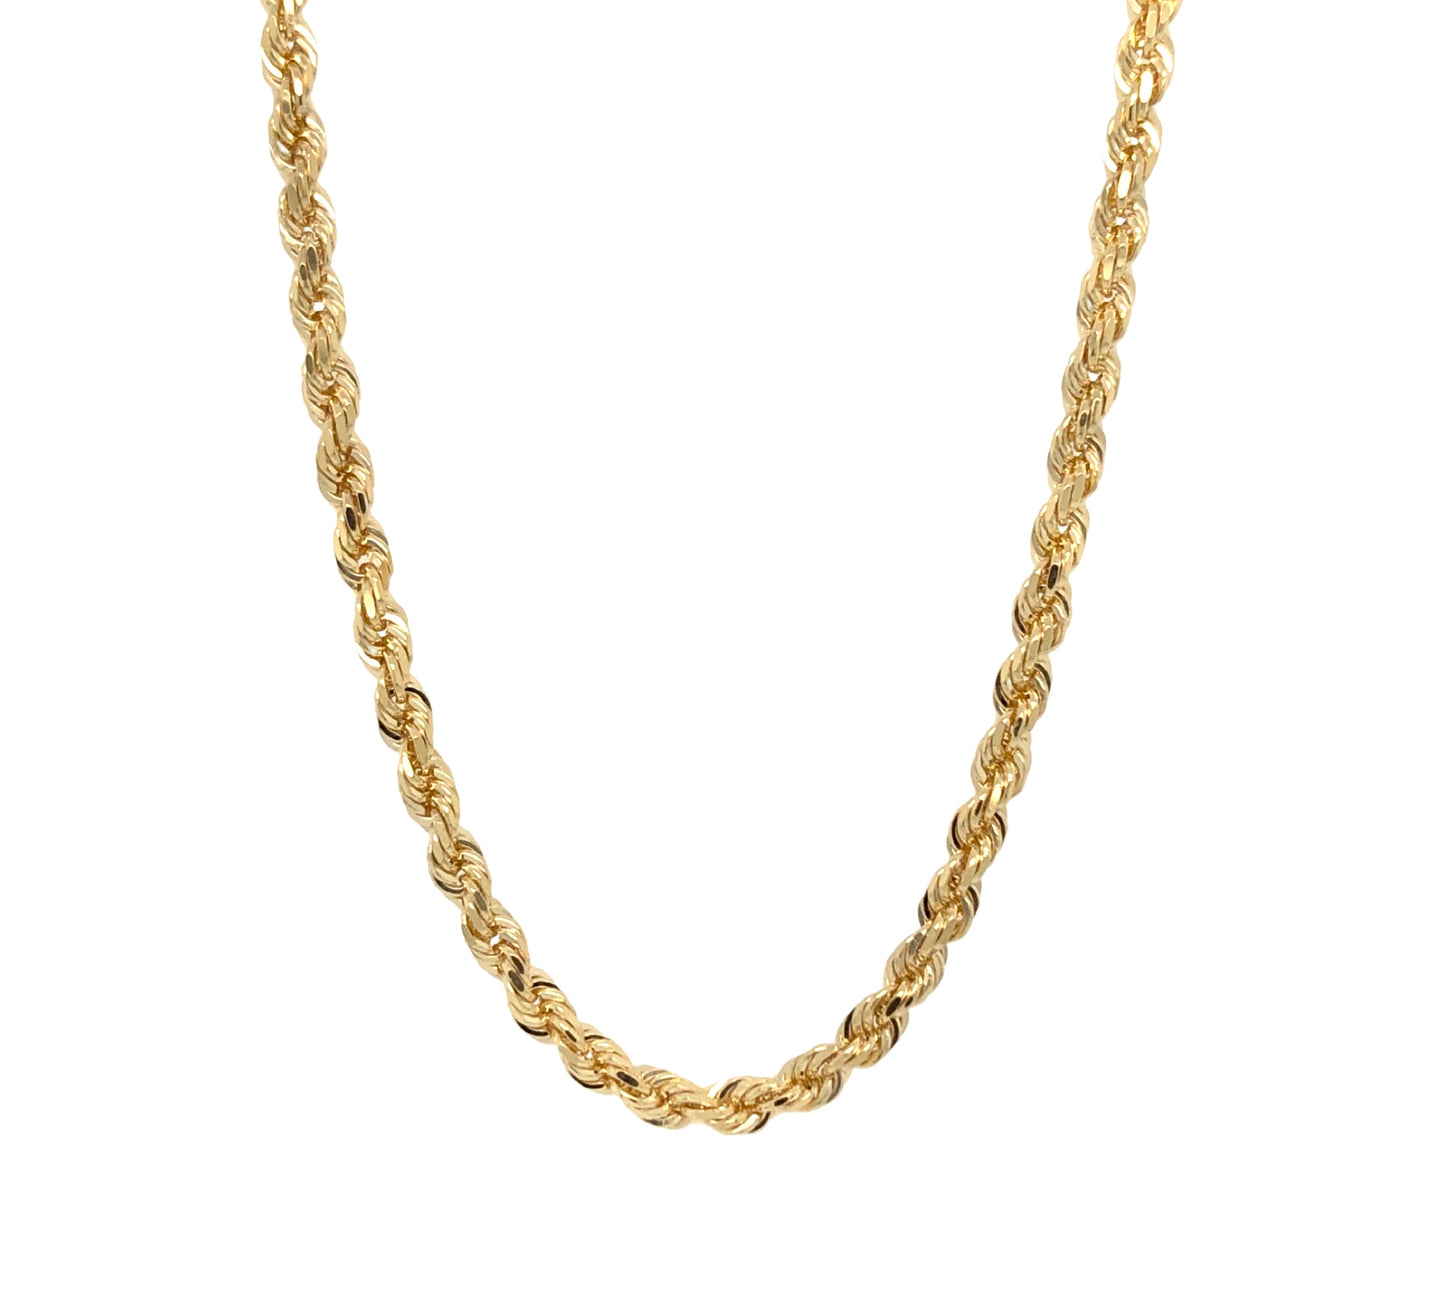 10k solid yellow gold rope chain 5mm